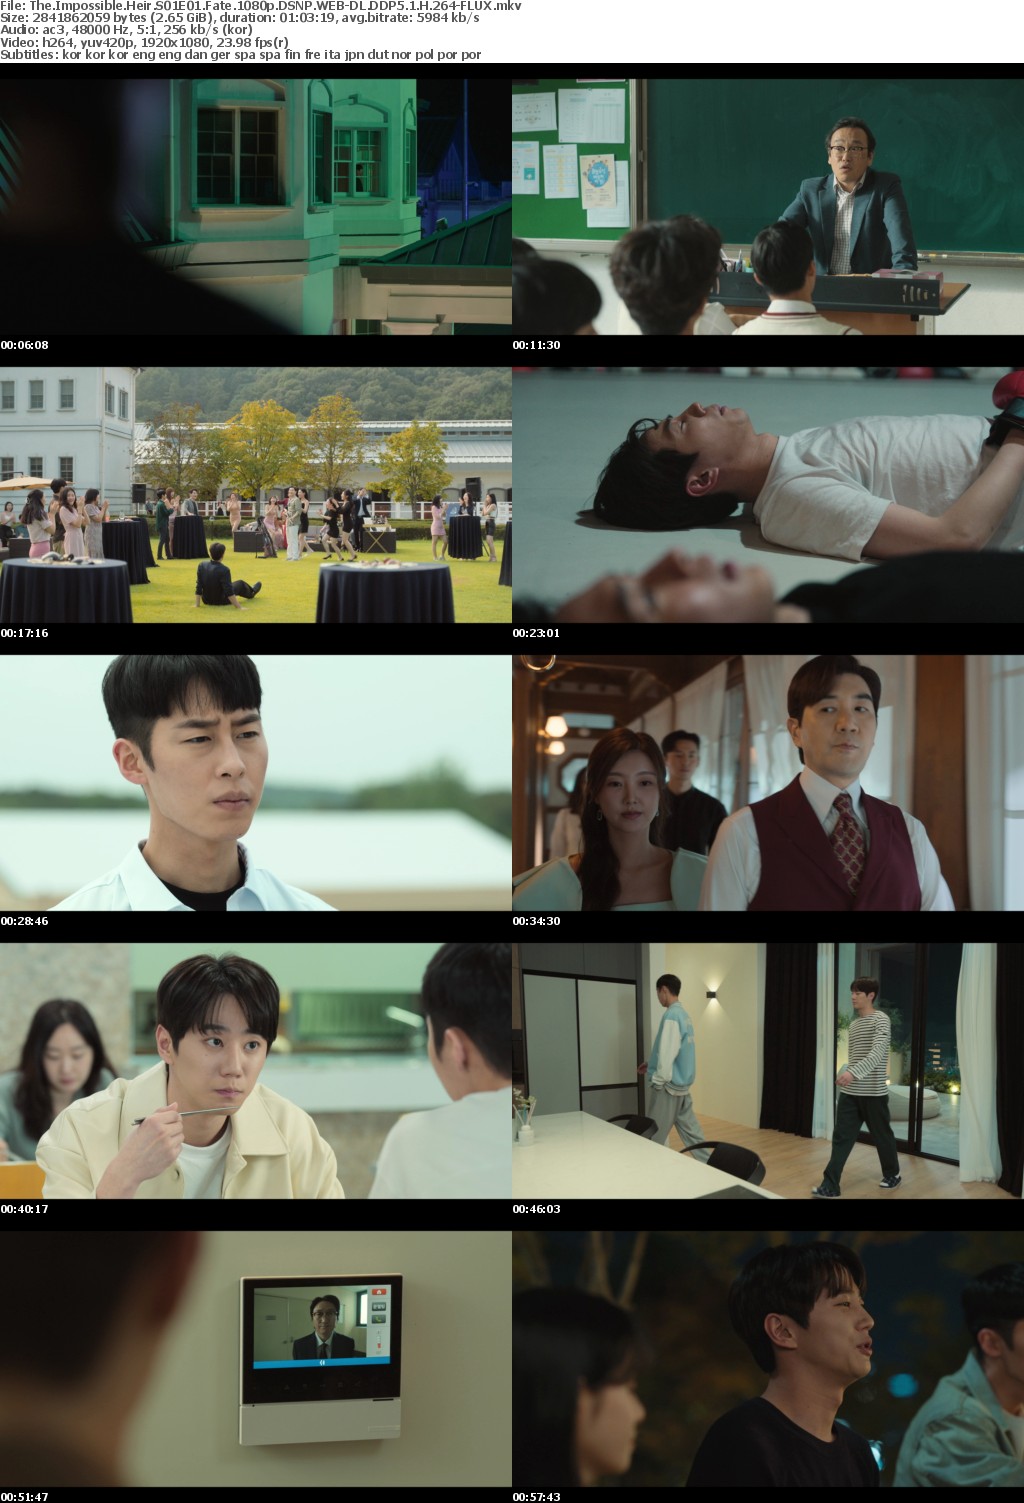 The Impossible Heir S01E01 Fate 1080p DSNP WEB-DL DDP5 1 H 264-FLUX